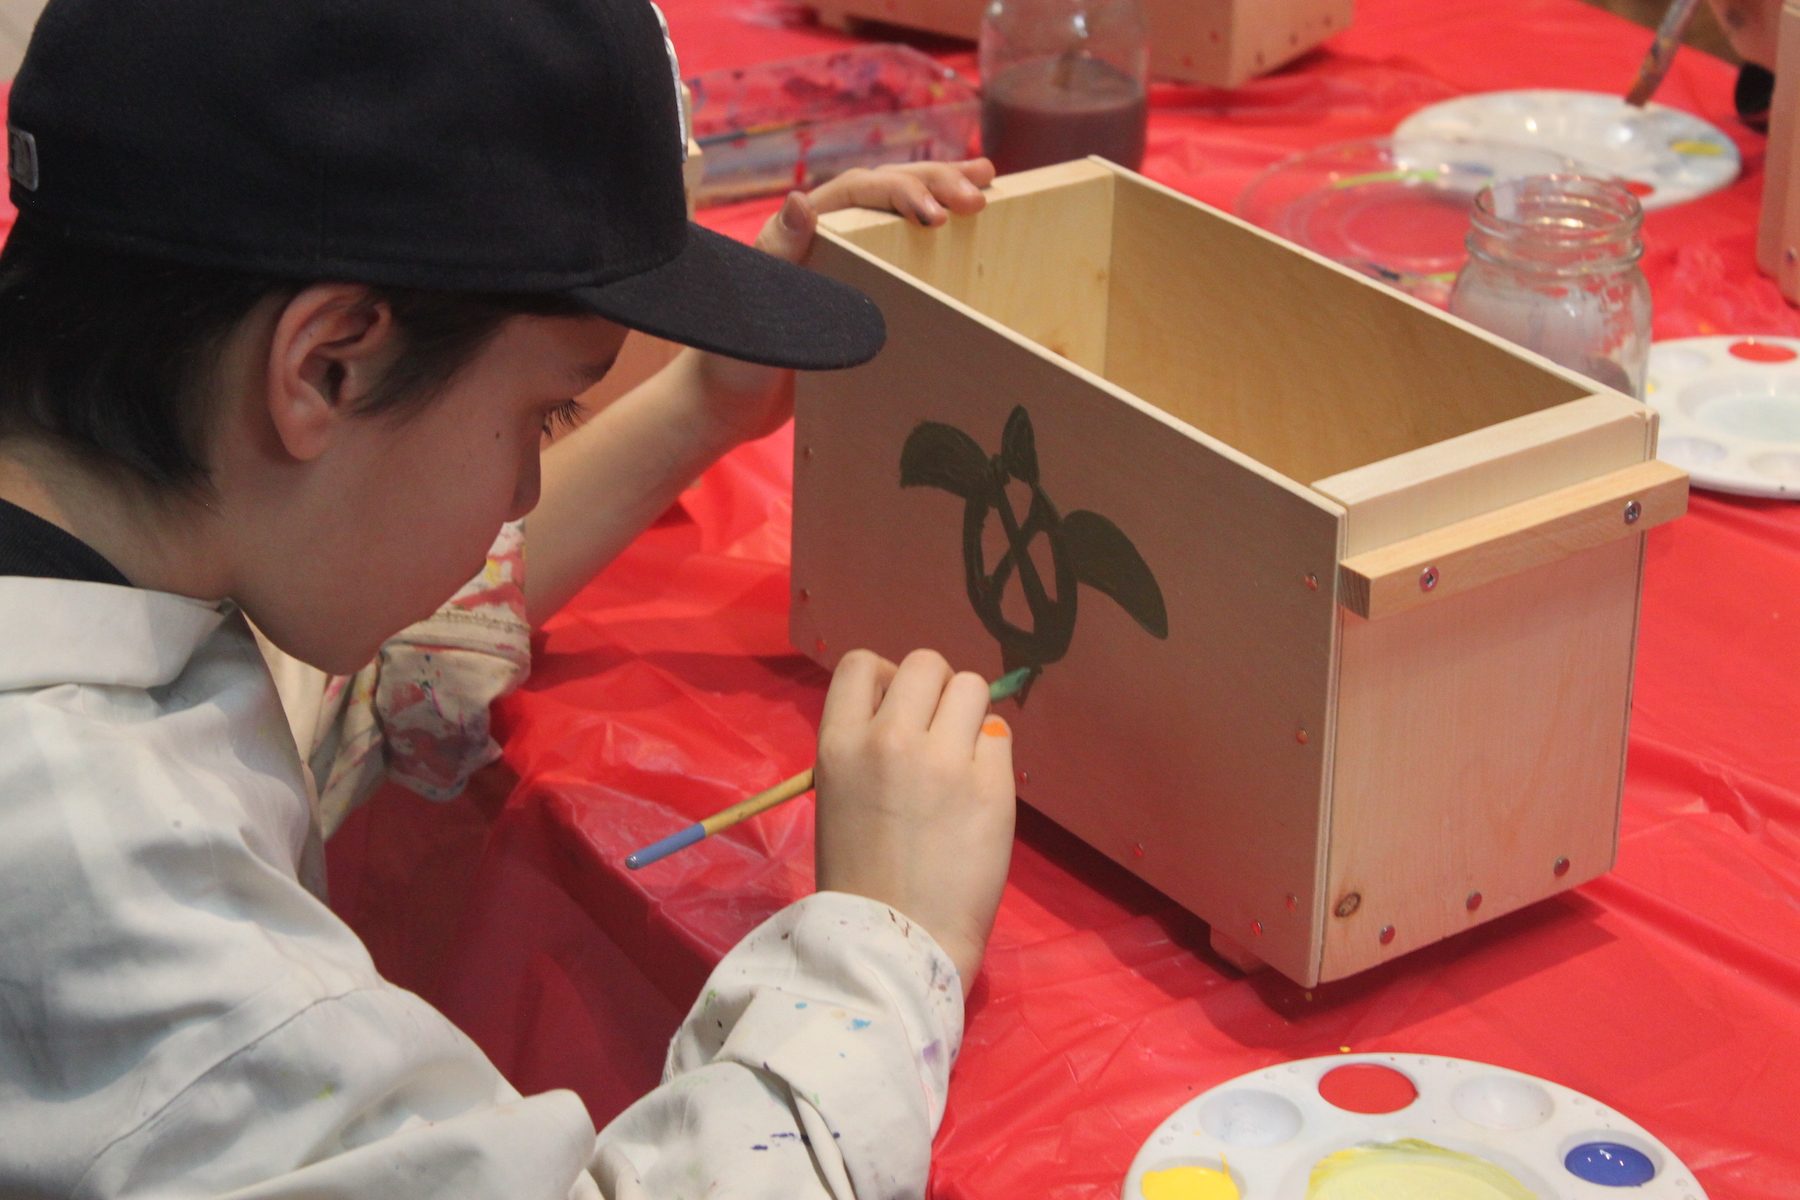 A young boy concentrates as he paints a green turtle onto a wooden wanigan or box. There is a paint try beside him.